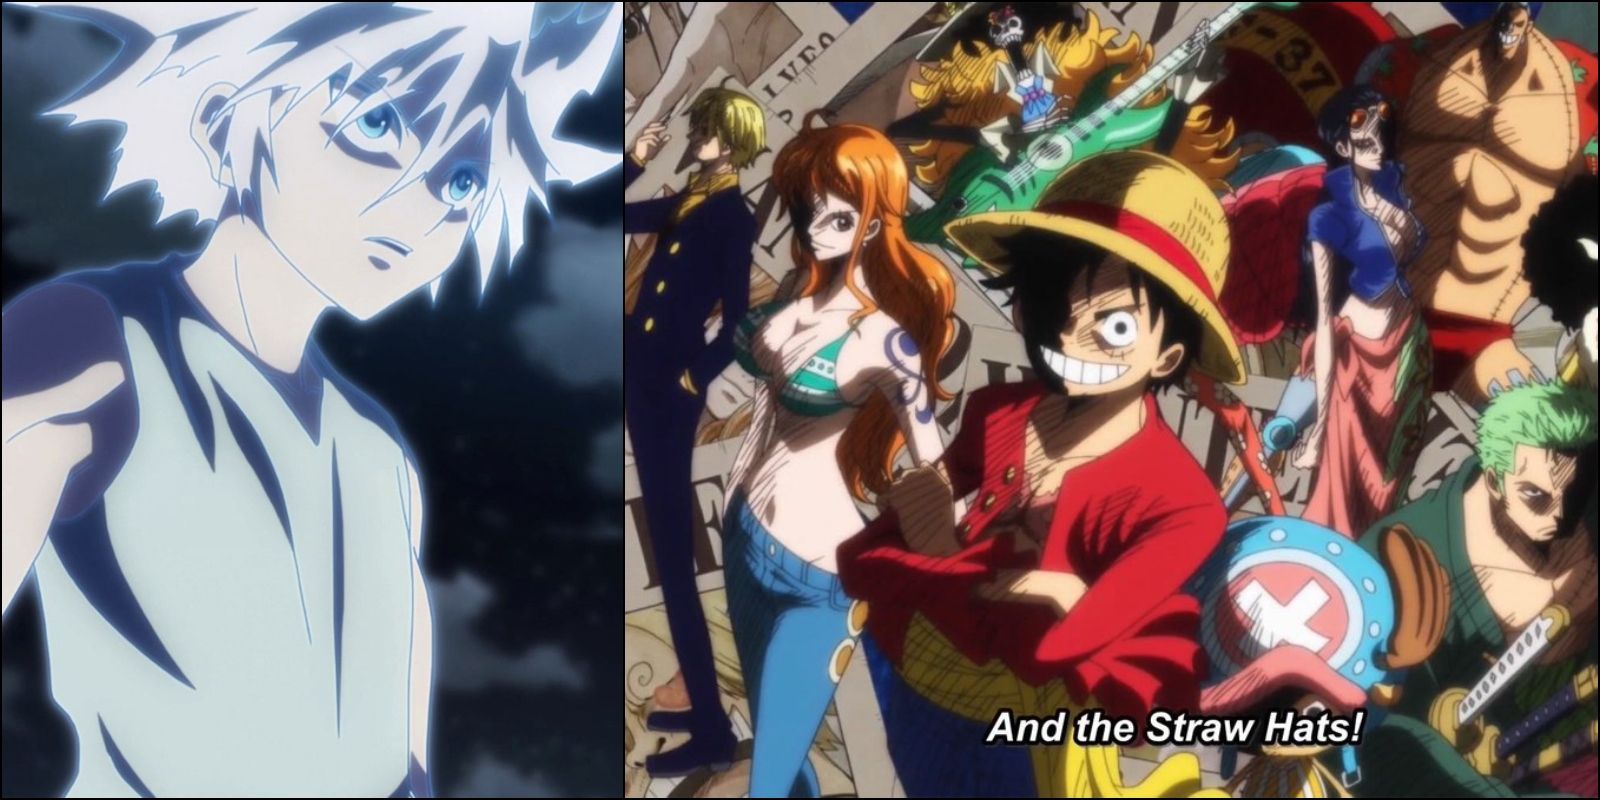 One electric boy vs the cast of One Piece; who would win?